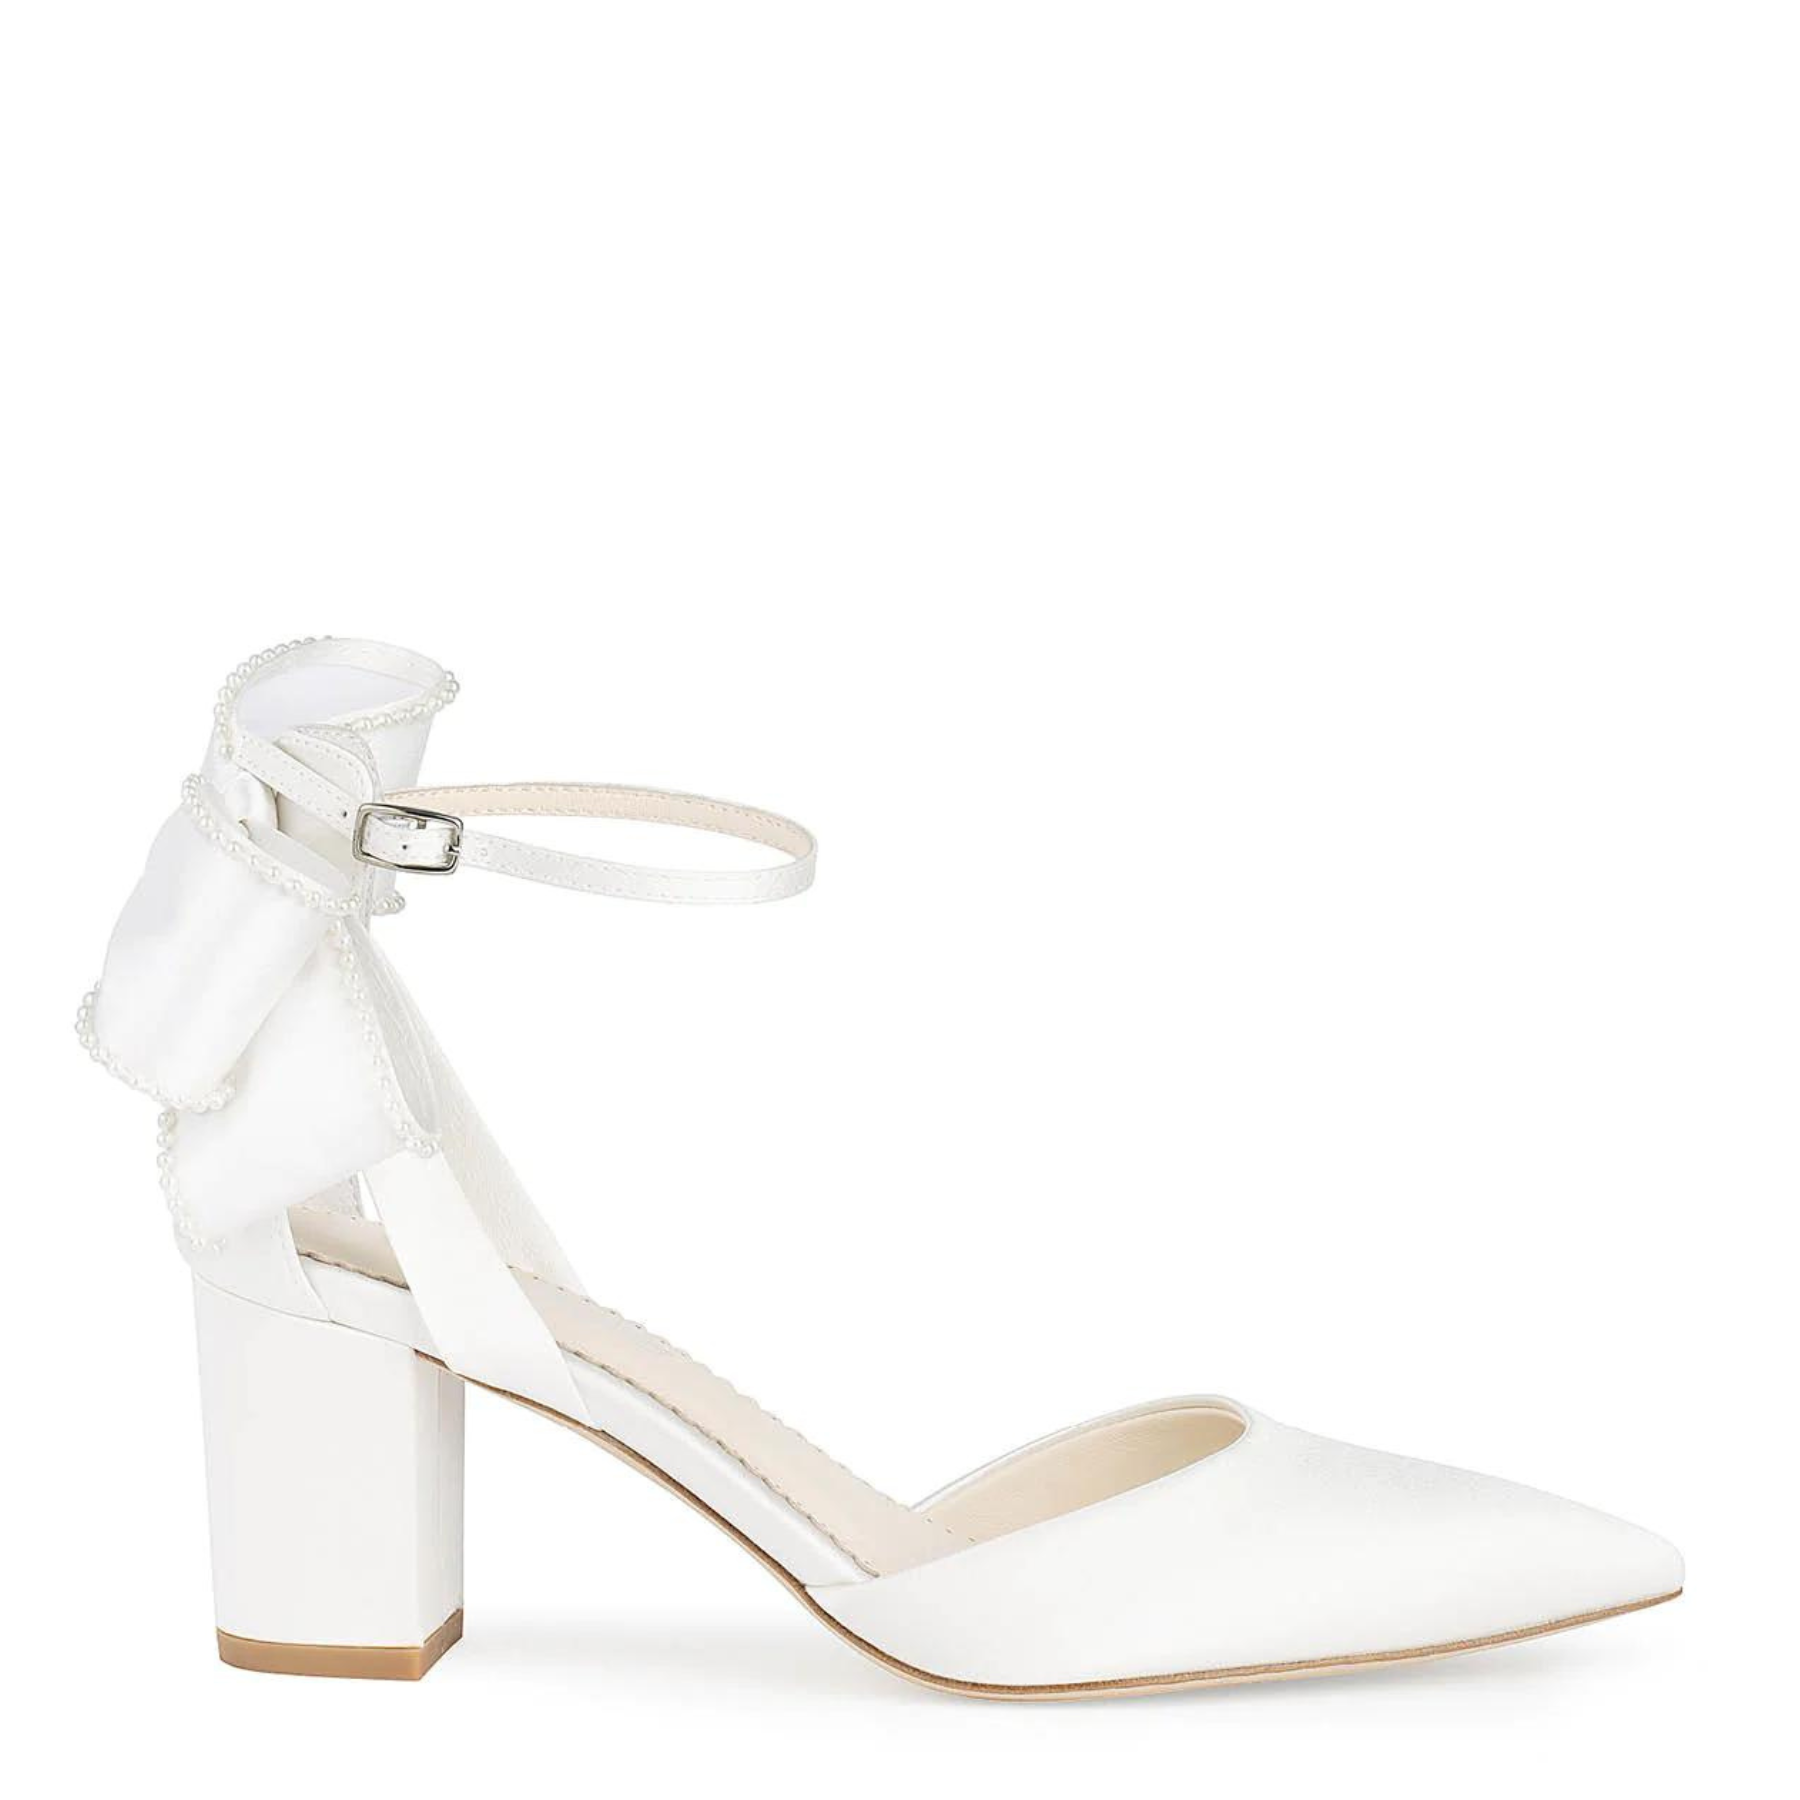 26 Best Block Heel Wedding Shoes for Brides Who Value Comfort And Style!